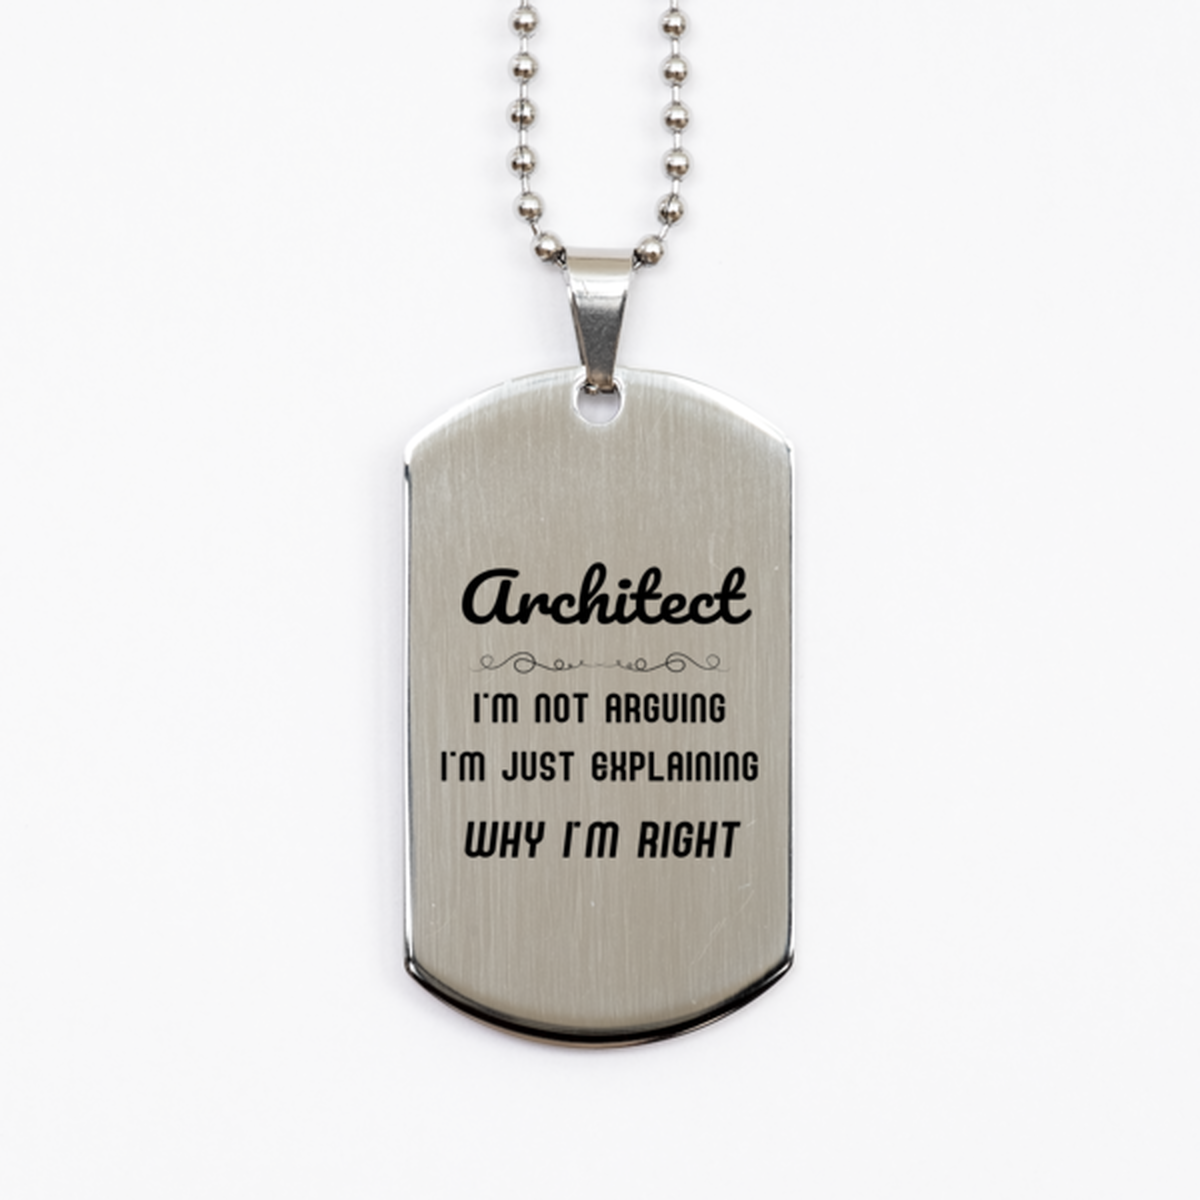 Architect I'm not Arguing. I'm Just Explaining Why I'm RIGHT Silver Dog Tag, Funny Saying Quote Architect Gifts For Architect Graduation Birthday Christmas Gifts for Men Women Coworker